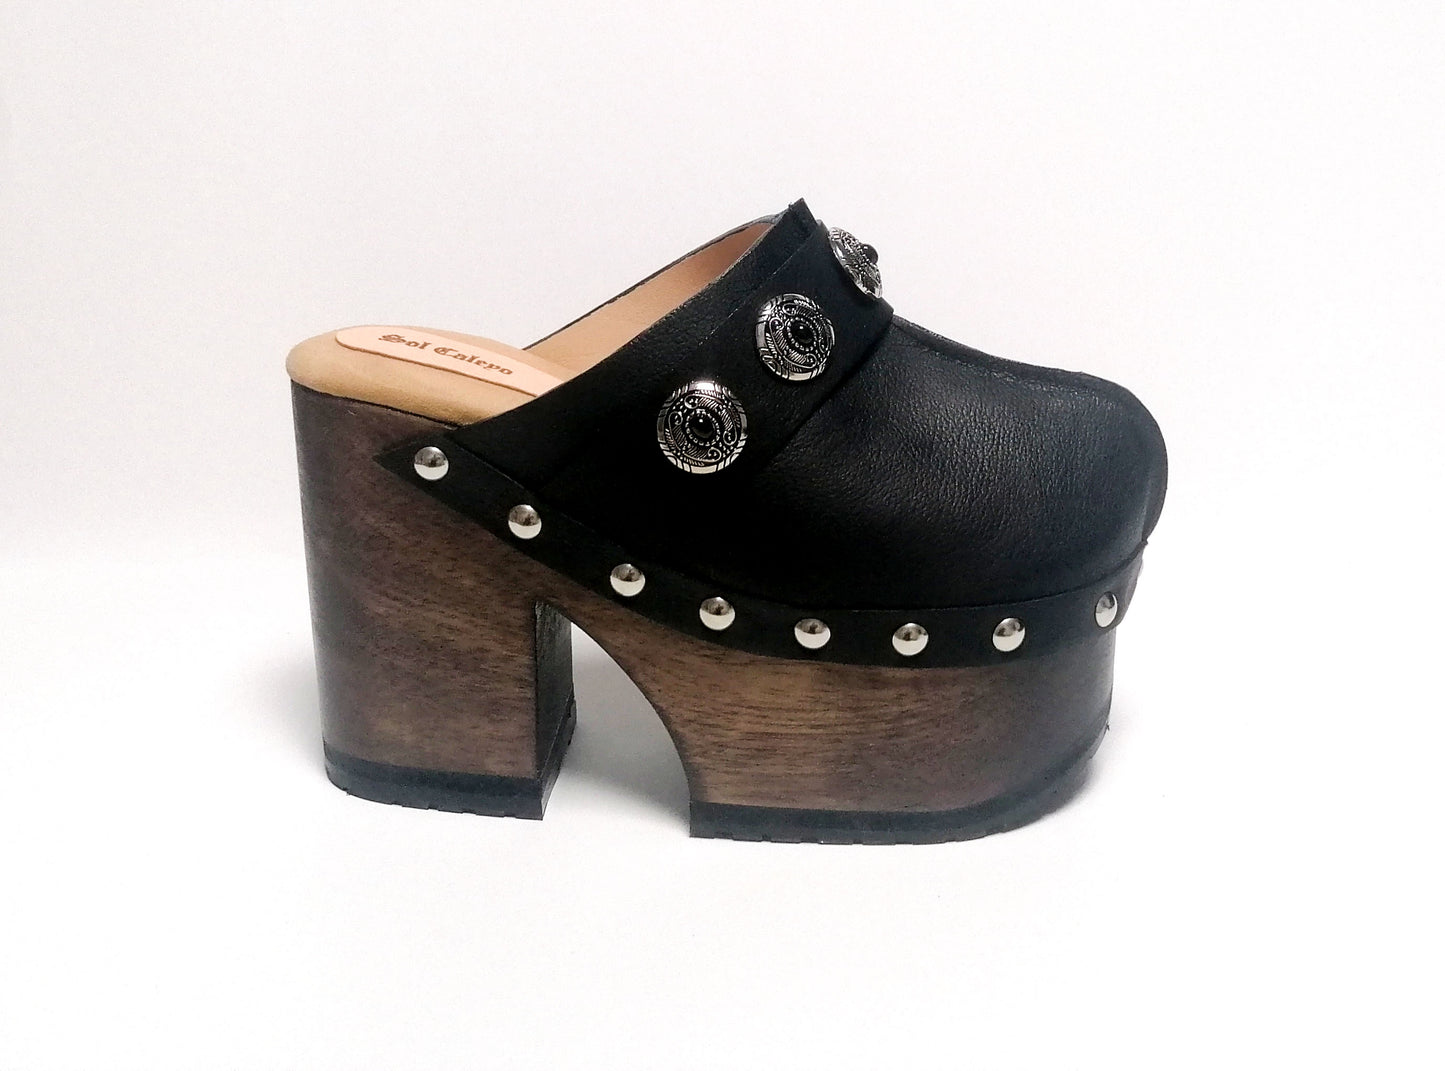 Vintage style black leather clogs. Super high heel clog decorated with vintage silver conchos. Bohemian style mule. Vintage 70's style platform clogs. Sizes 34 to 47. High quality leather shoes handmade by sol Caleyo. Sustainable fashion.